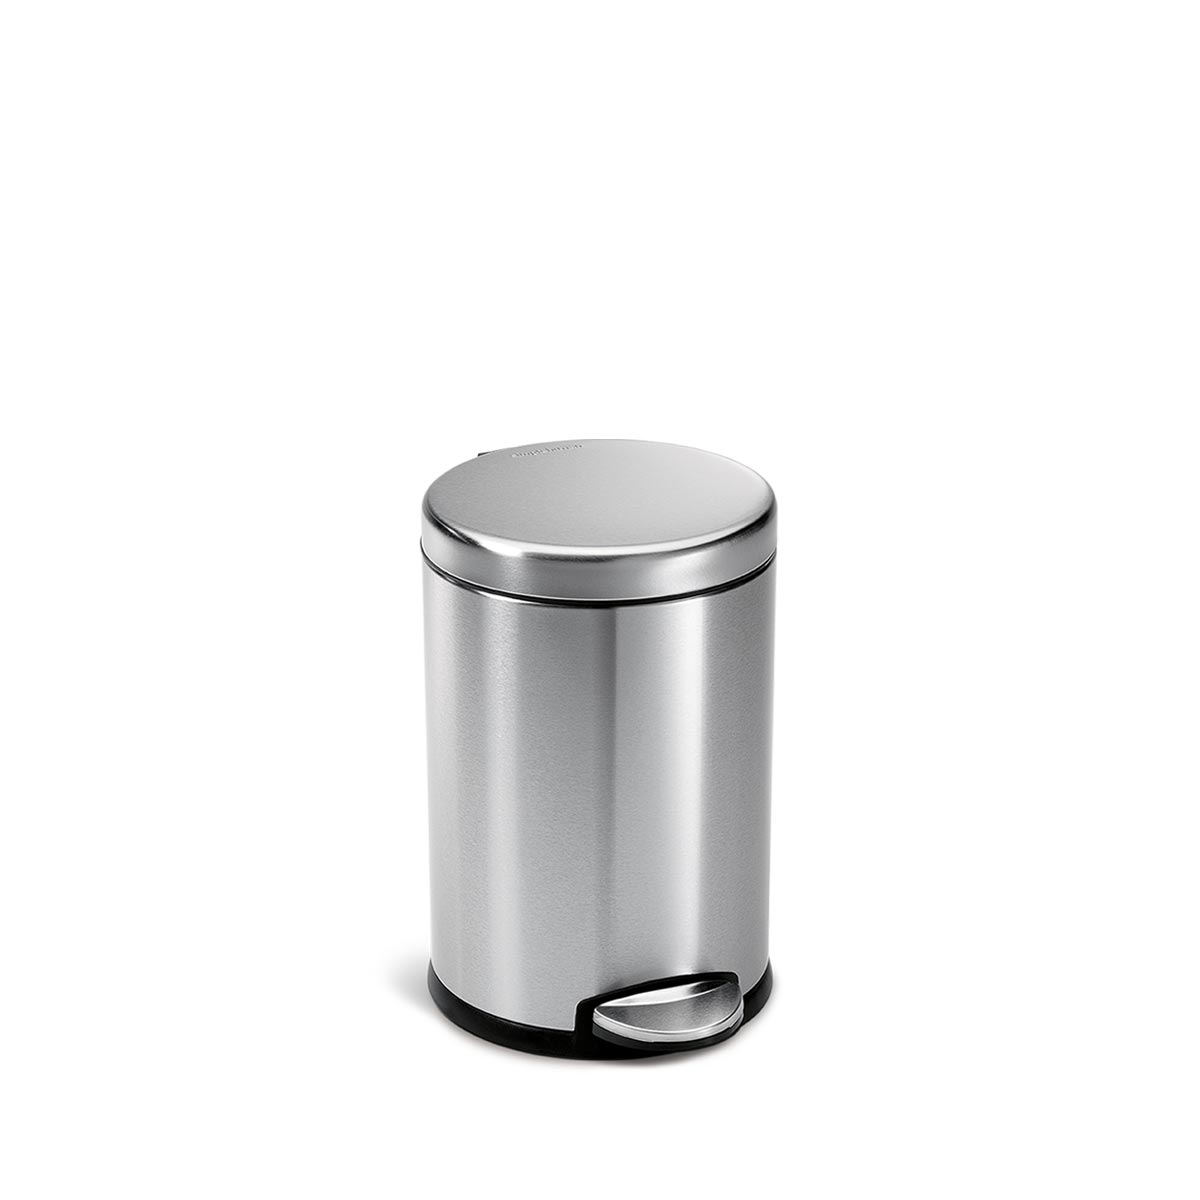 simplehuman 4.5 litre, mini round step can, polished stainless steel